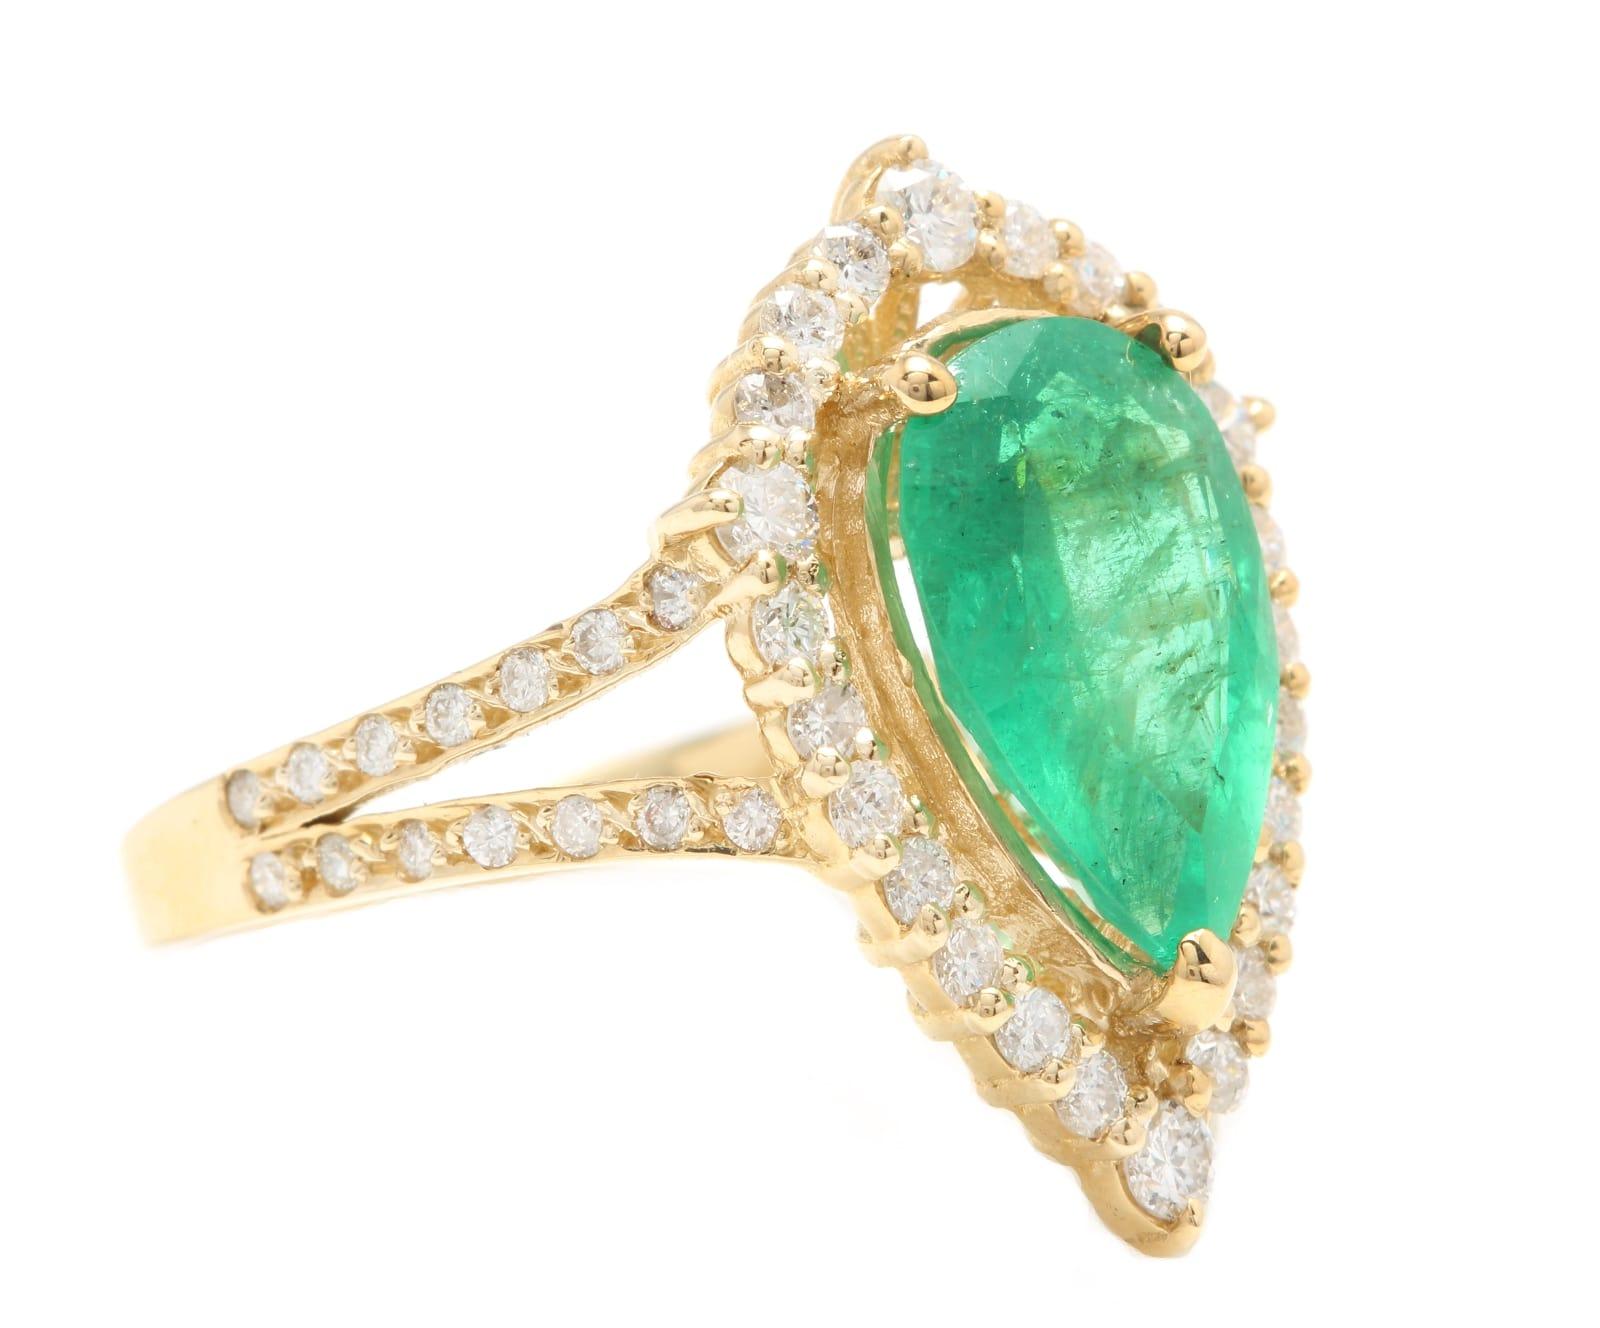 5.30 Carats Natural Emerald and Diamond 14K Solid Yellow Gold Ring

Suggested Replacement Value:  $8,500.00

Total Natural Pear Cut Emerald Weight is: 4.50 Carats

Emerald Measures: Approx. 13.00 x 8.00mm

Head of the ring measures: Approx. 21.00 x